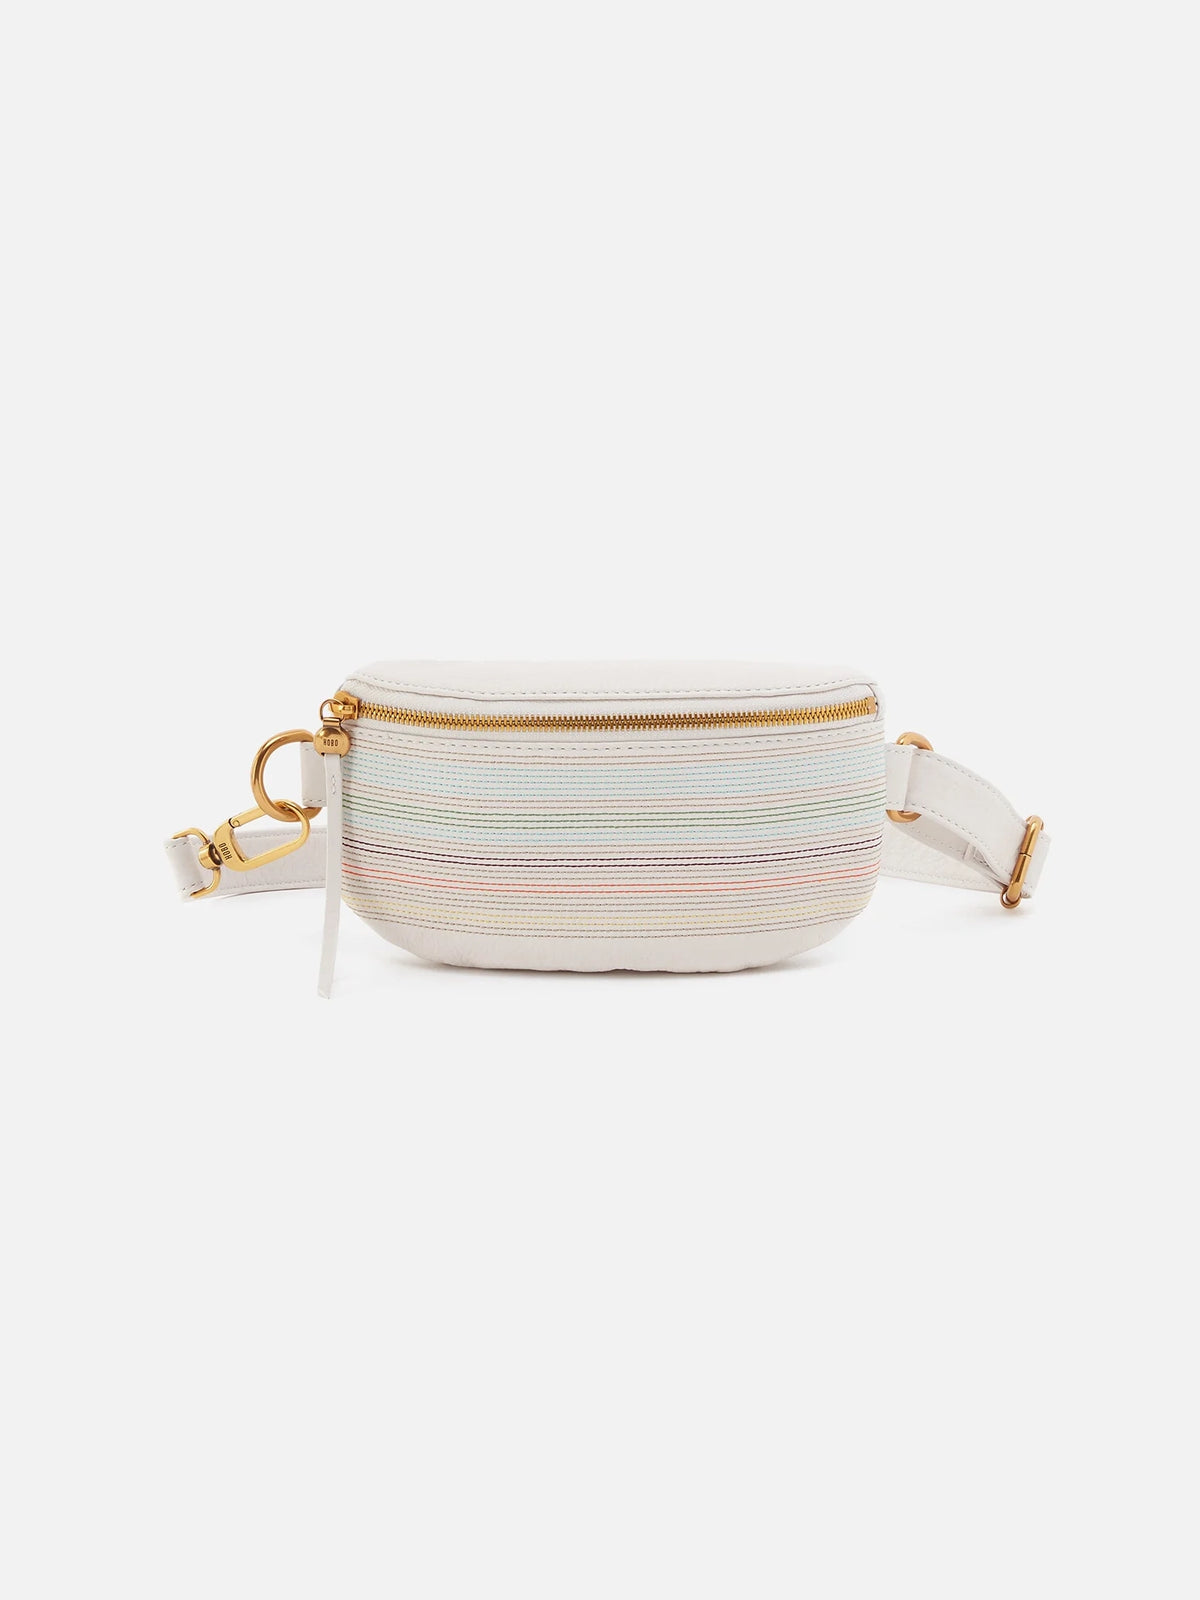 hobo fern belt bag in white multi stitched pebbled leather